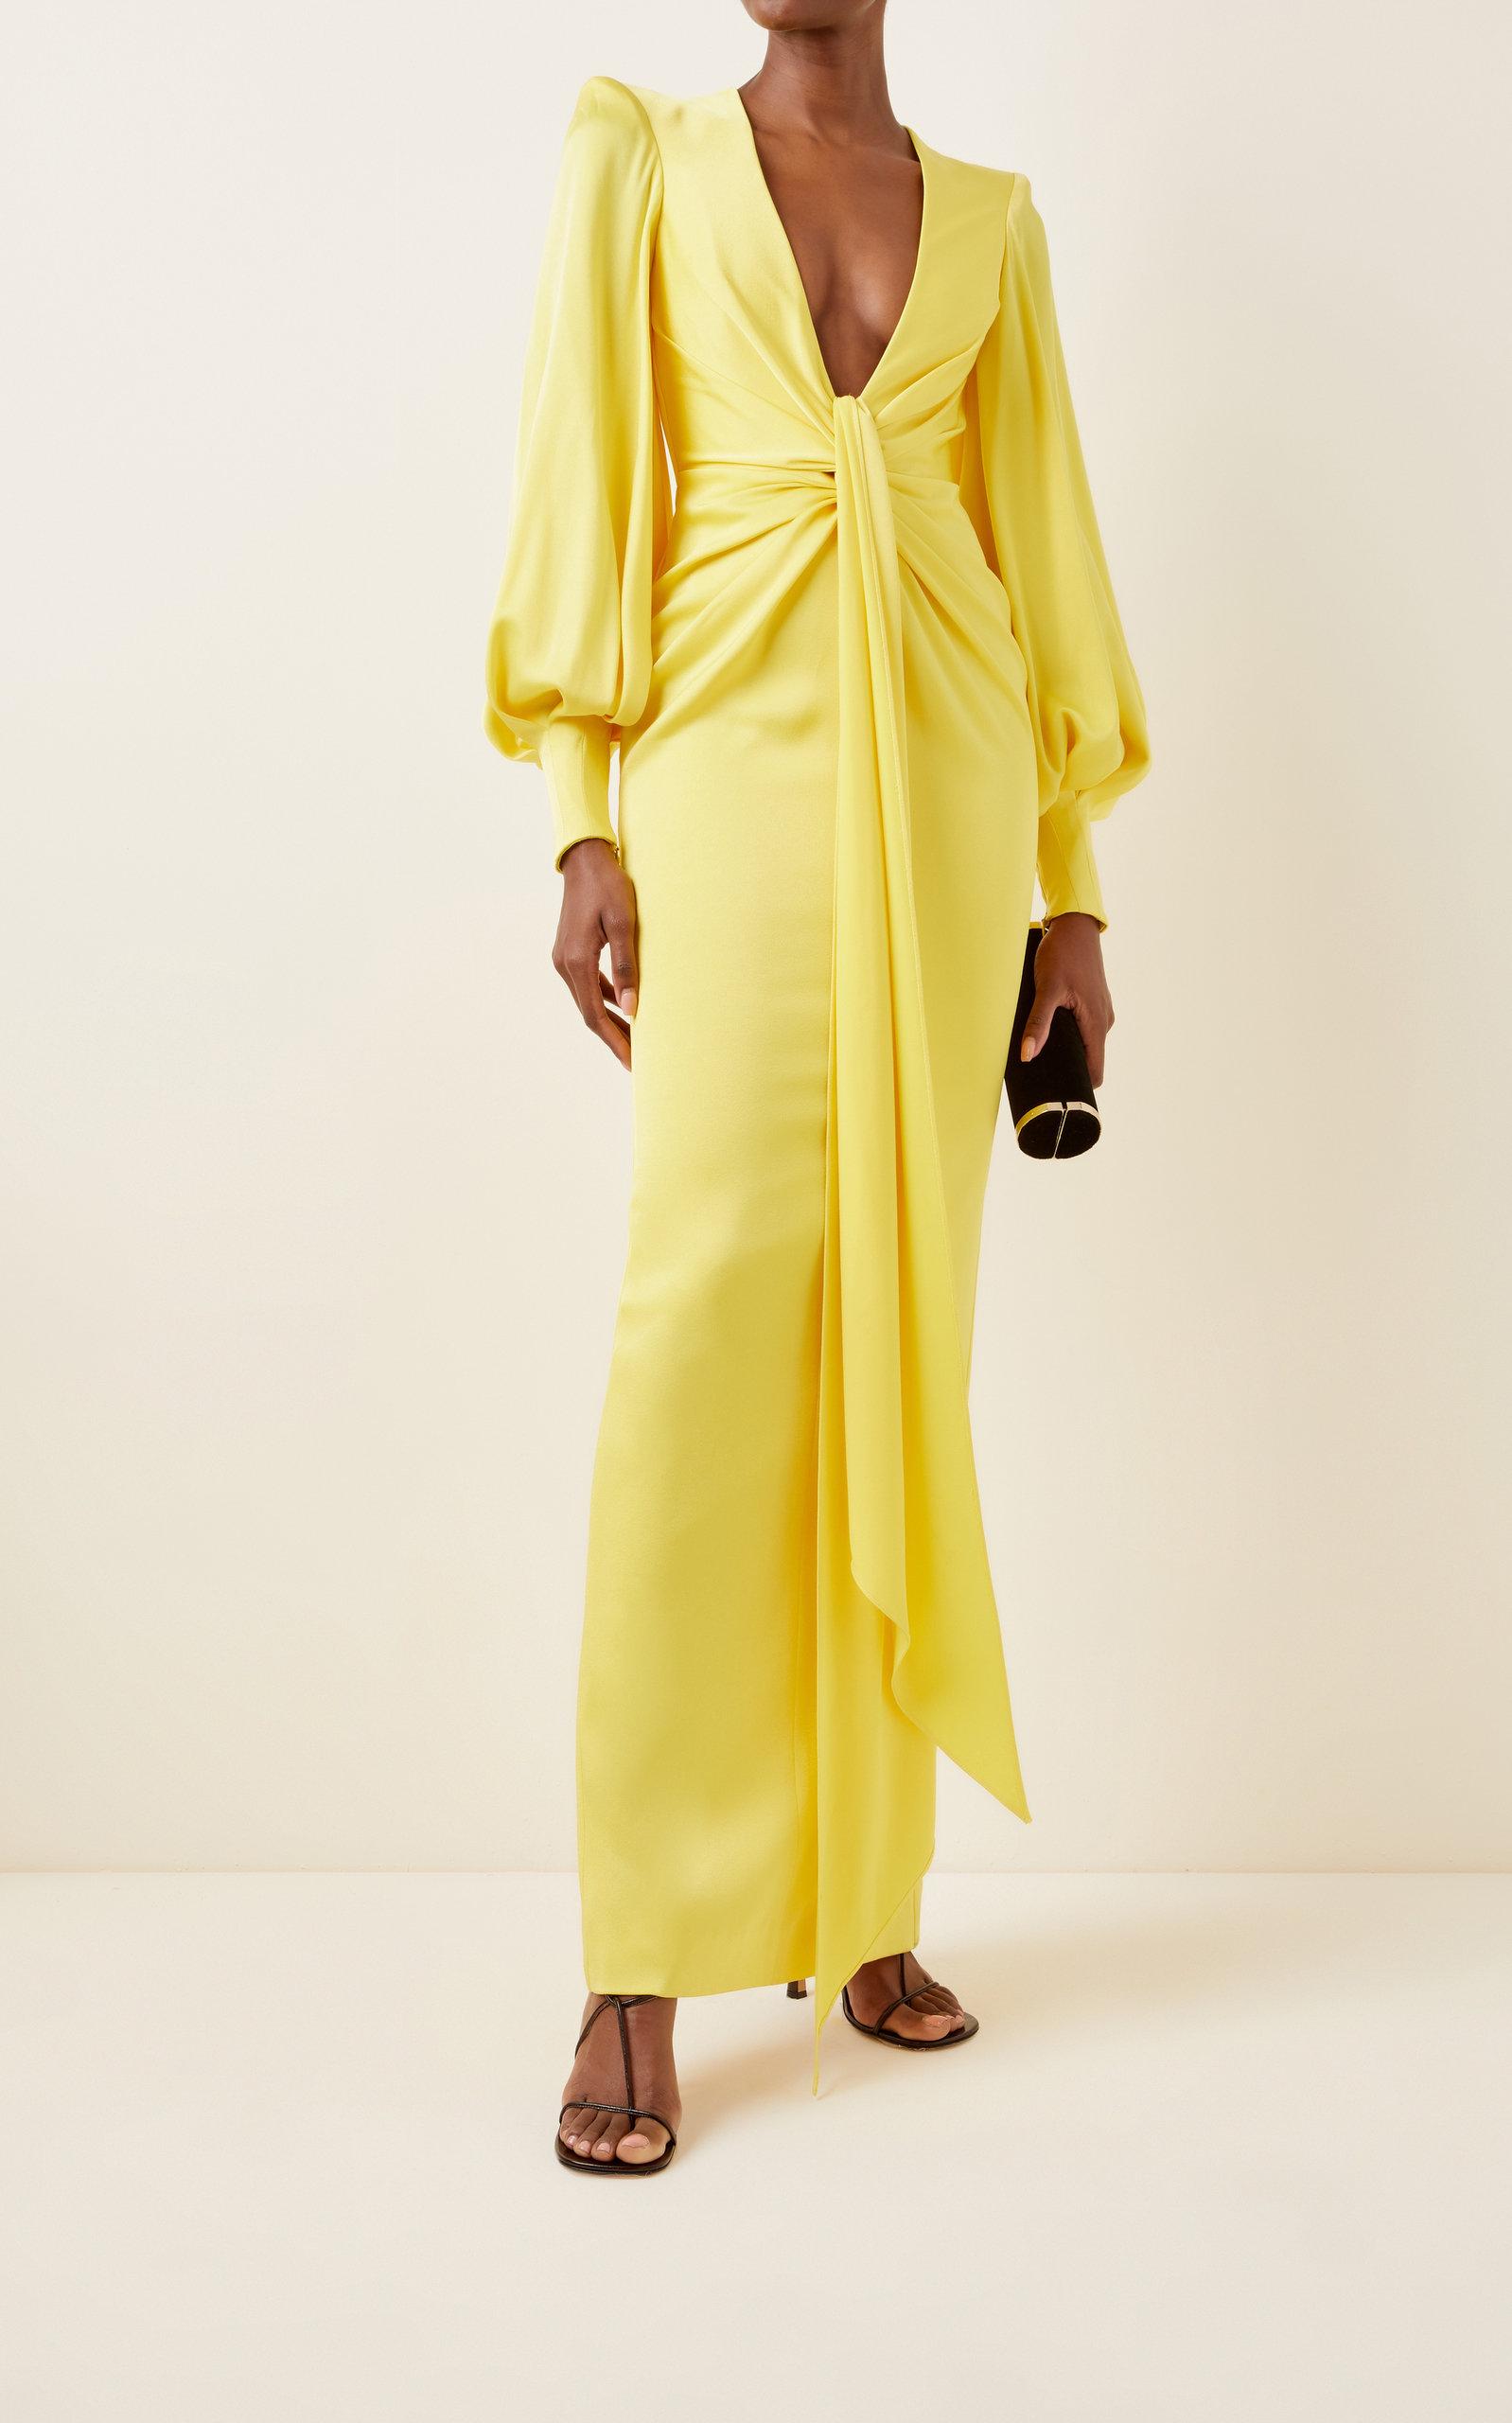 Alex Perry Dane Drape-detailed Satin Crepe Gown in Yellow | Lyst